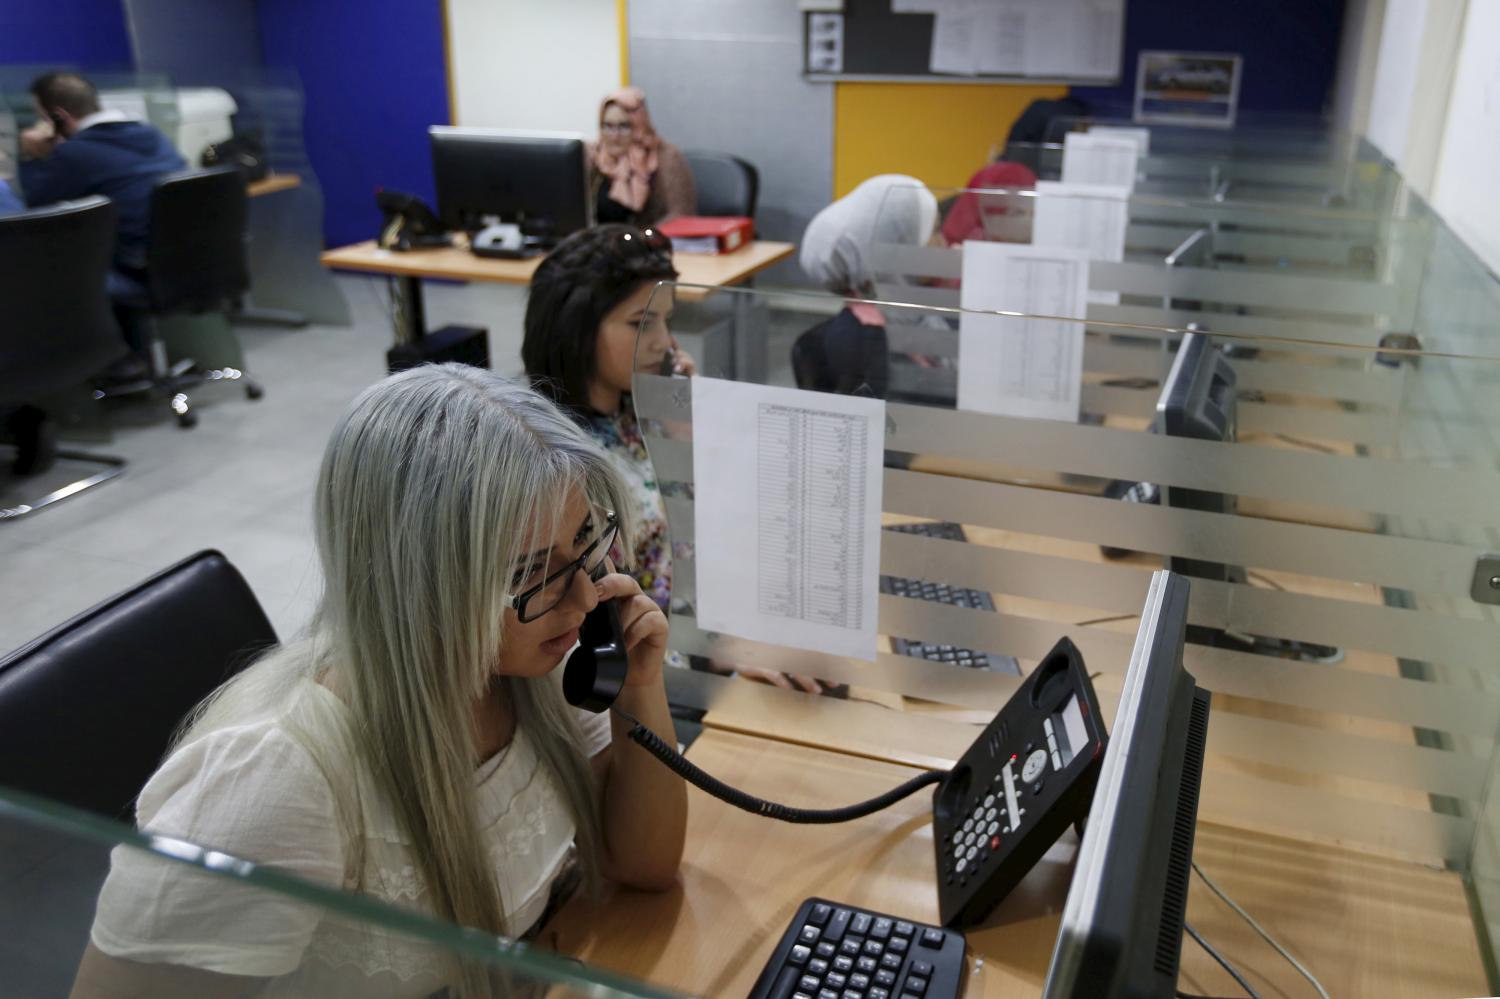 Call centre workers receive calls from female customers for taxi booking jobs at Noor Jordan for Transport  Taxi Moumayaz (Special Taxi) in Amman, Jordan, March 24, 2016. The Jordanian taxi company has launched a new service run only for women, exclusively by women, with 10 women taxi drivers for the first time in Jordan picking up only female passengers and families. The company chairman Abu al-Haj said they plan to hire another 10 women as drivers, and possibly more if the service expands. Picture taken March 24, 2016. REUTERS/Muhammad Hamed